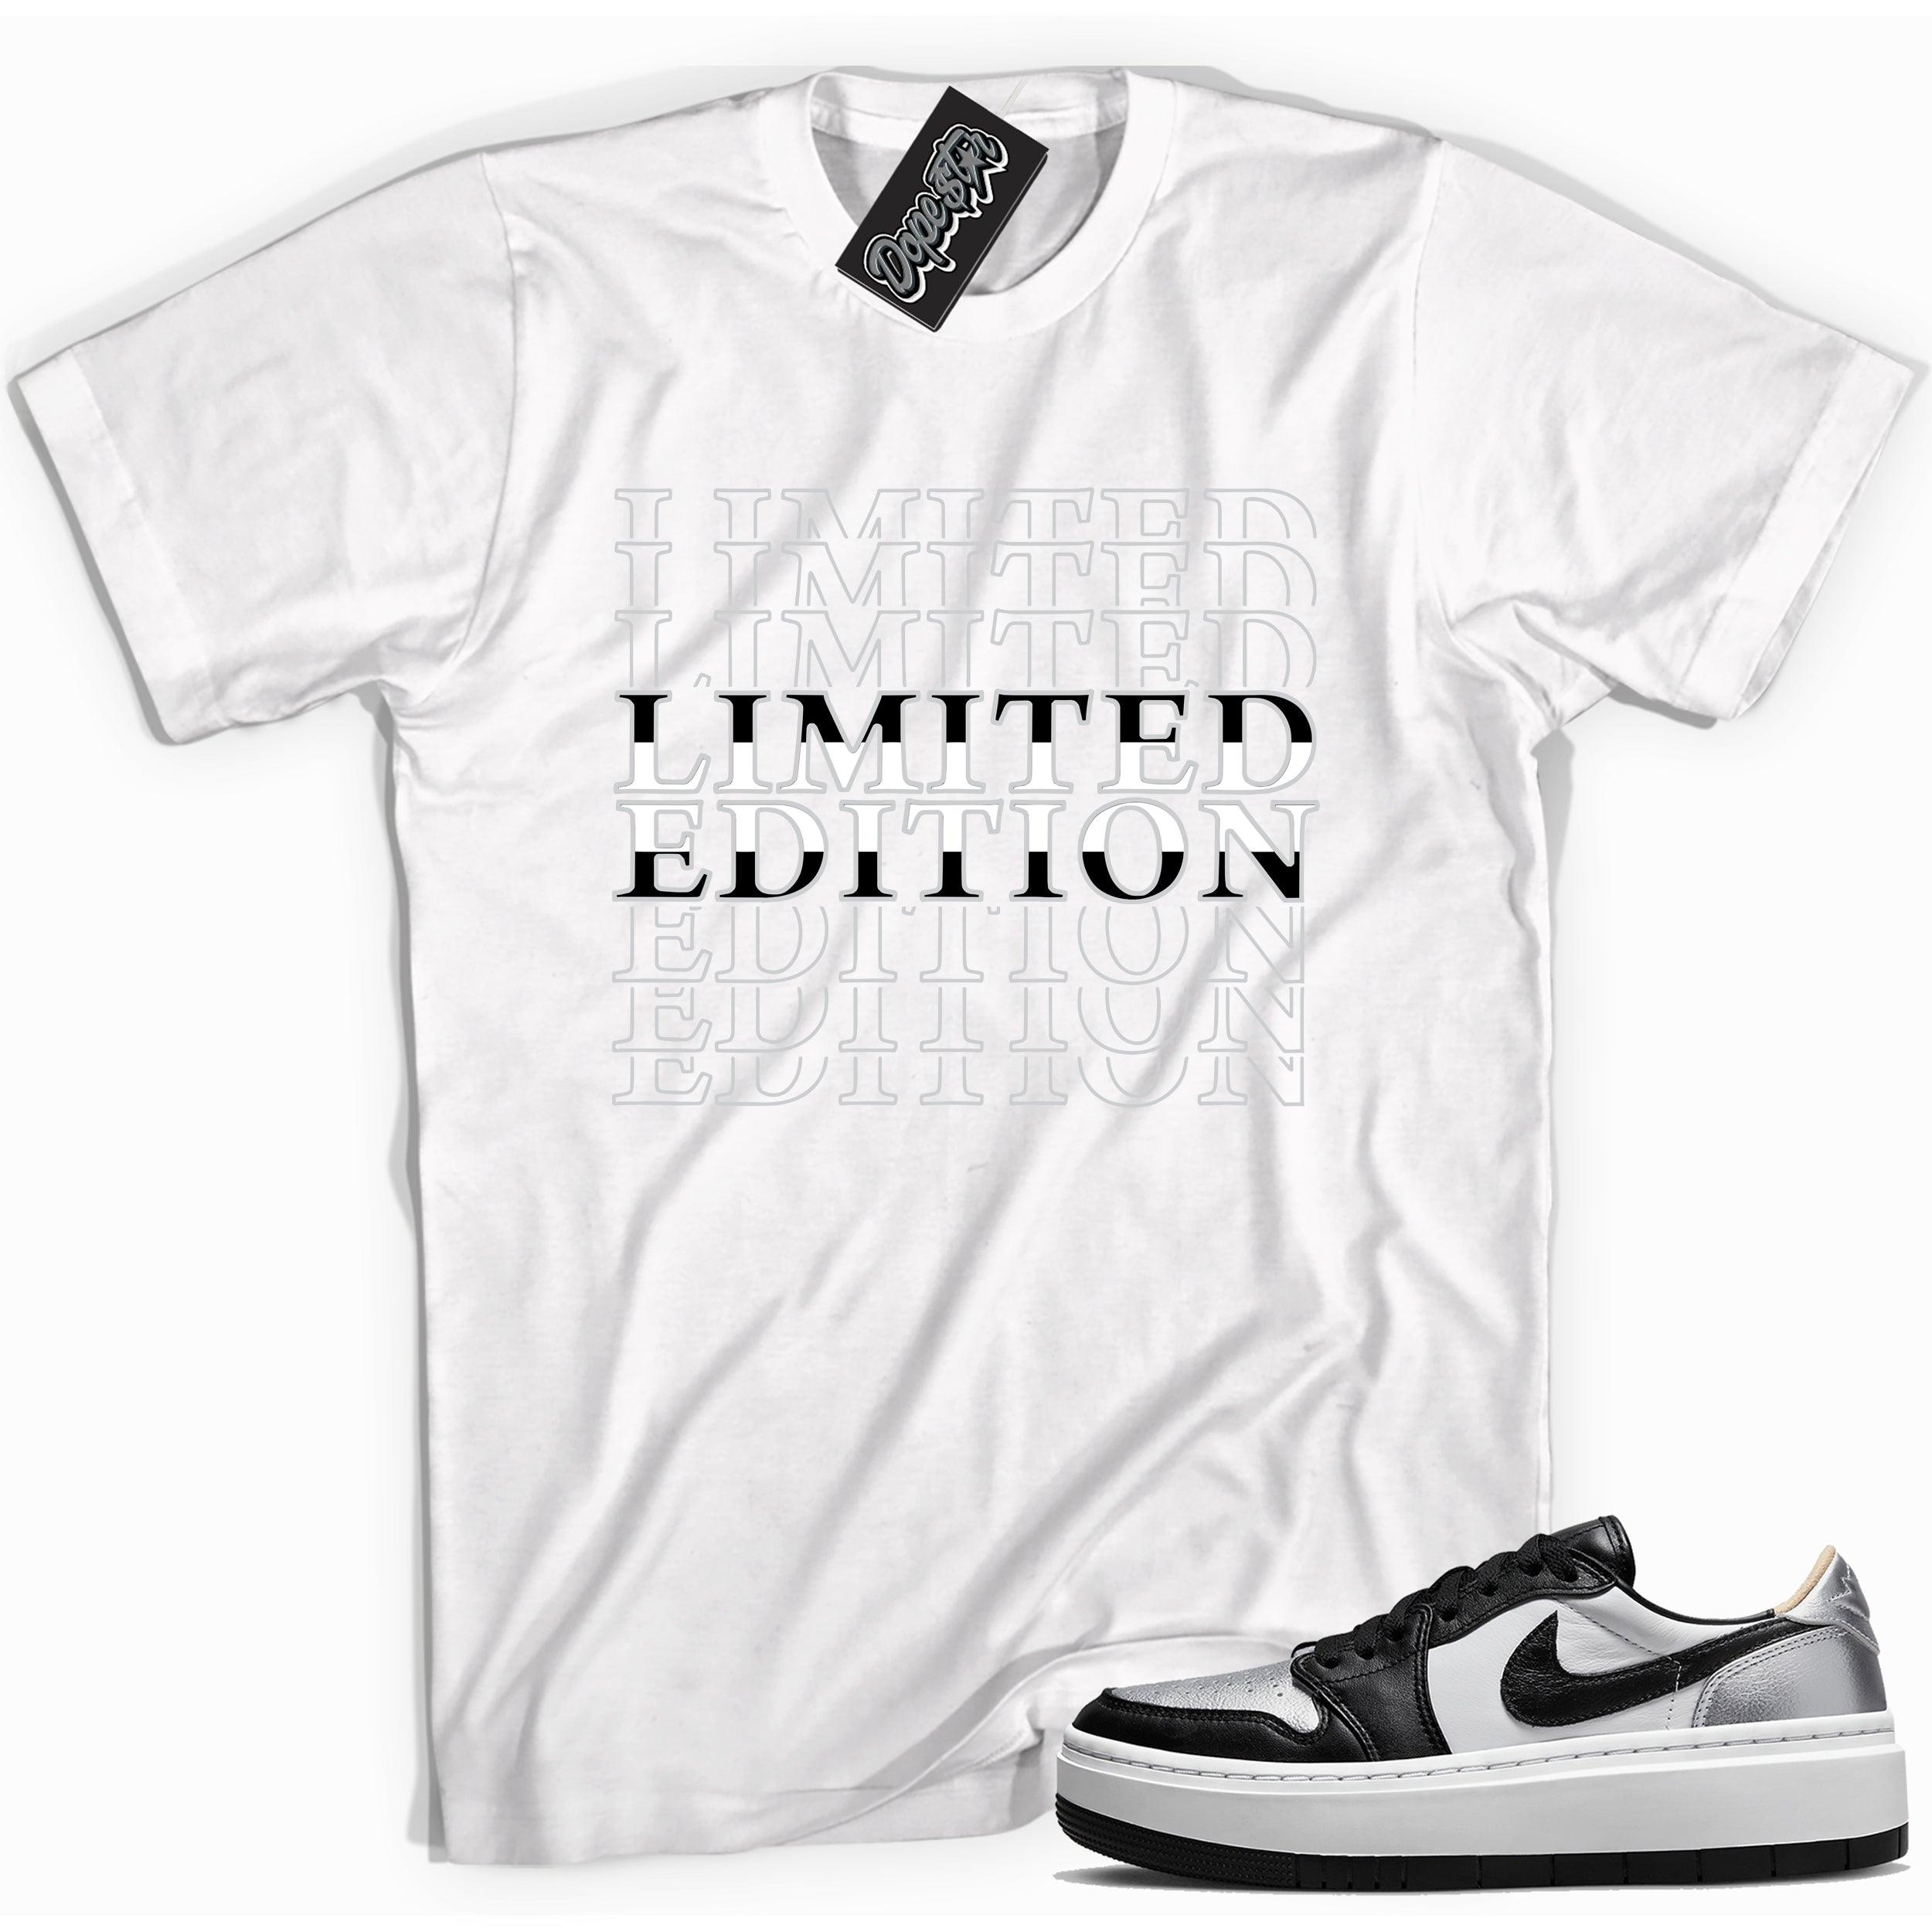 Cool white graphic tee with 'limited edition' print, that perfectly matches Air Jordan 1 Elevate Low SE Silver Toe sneakers.